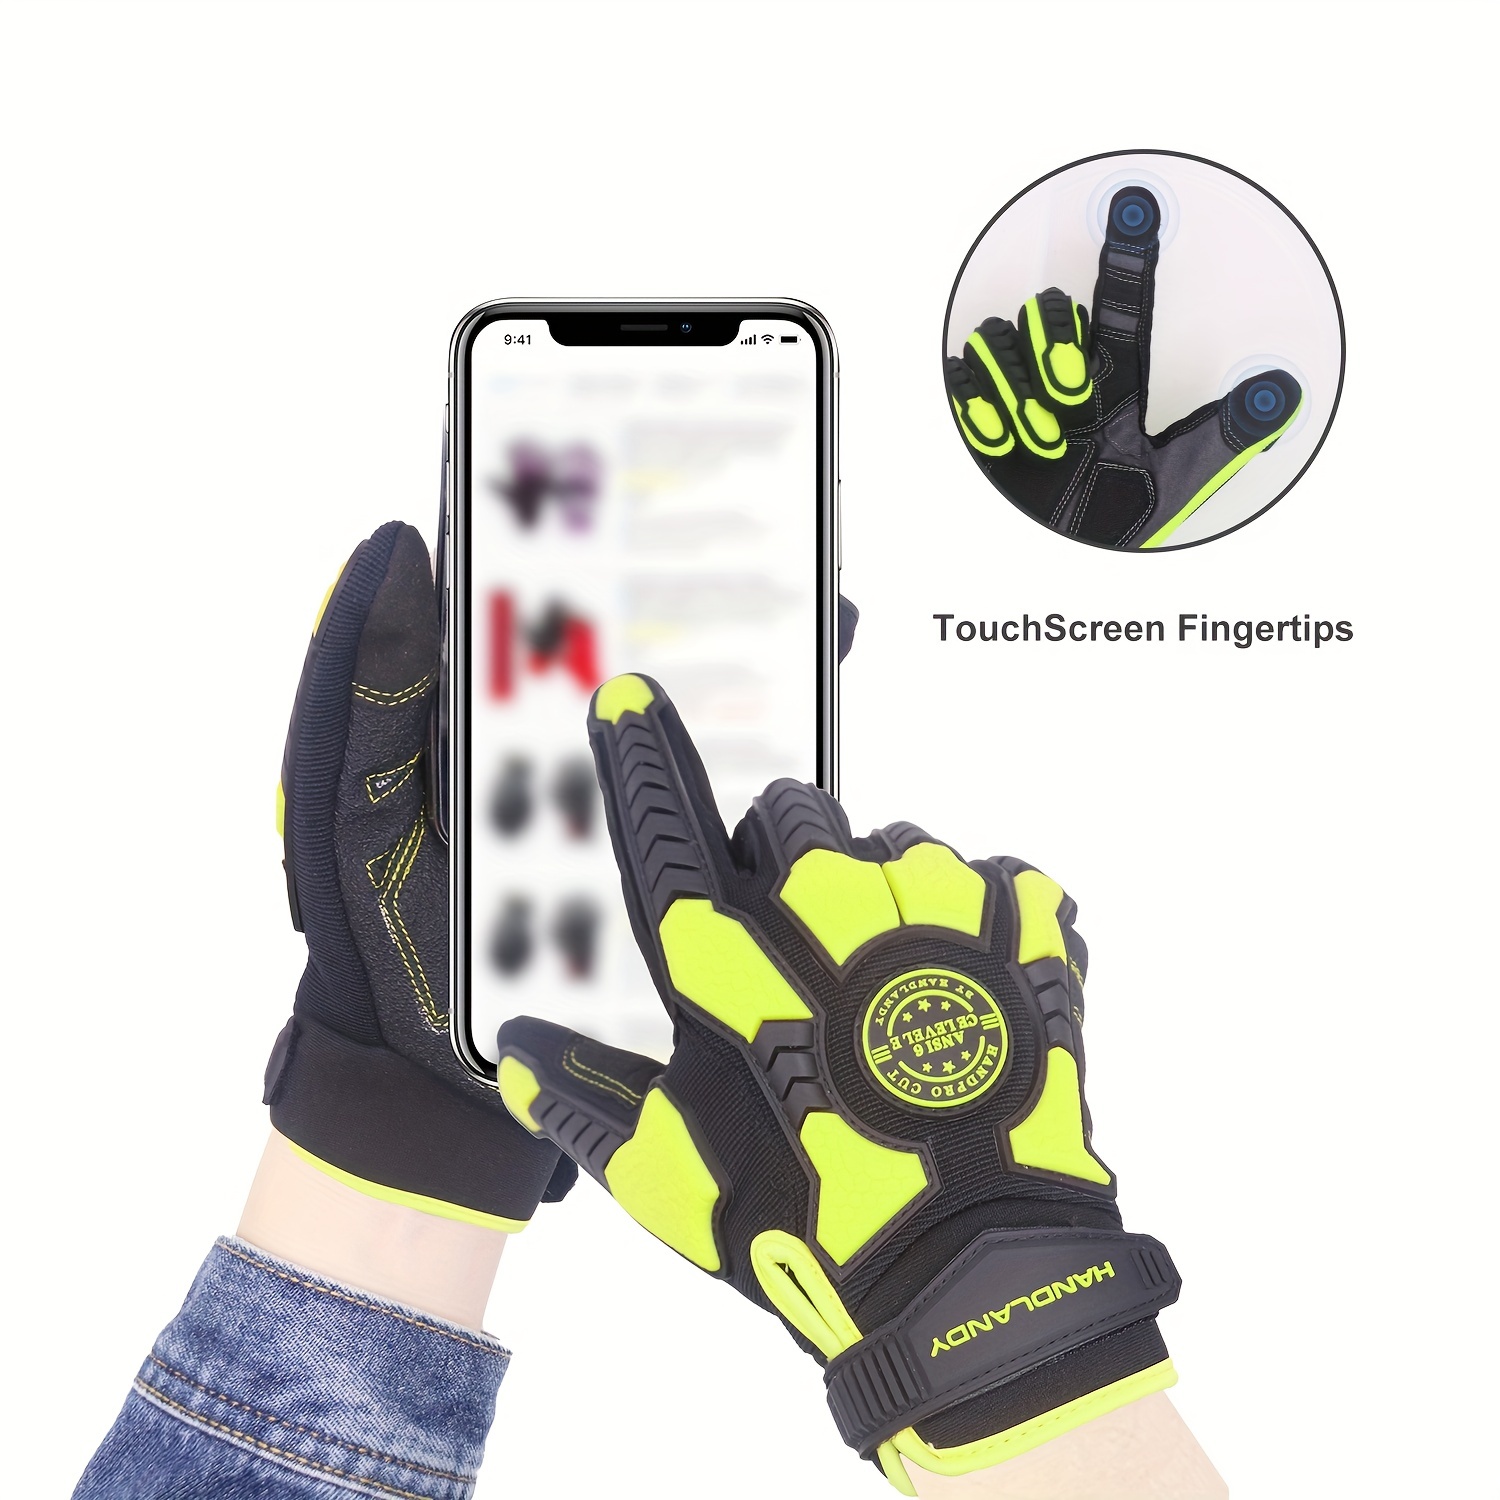 Level 7 Cut Resistant Gloves, Safety Work Gloves for Men Women, Impact  Gloves with TPR Protection, ANSI Level A7 Protection, Touch Screen Mechanic